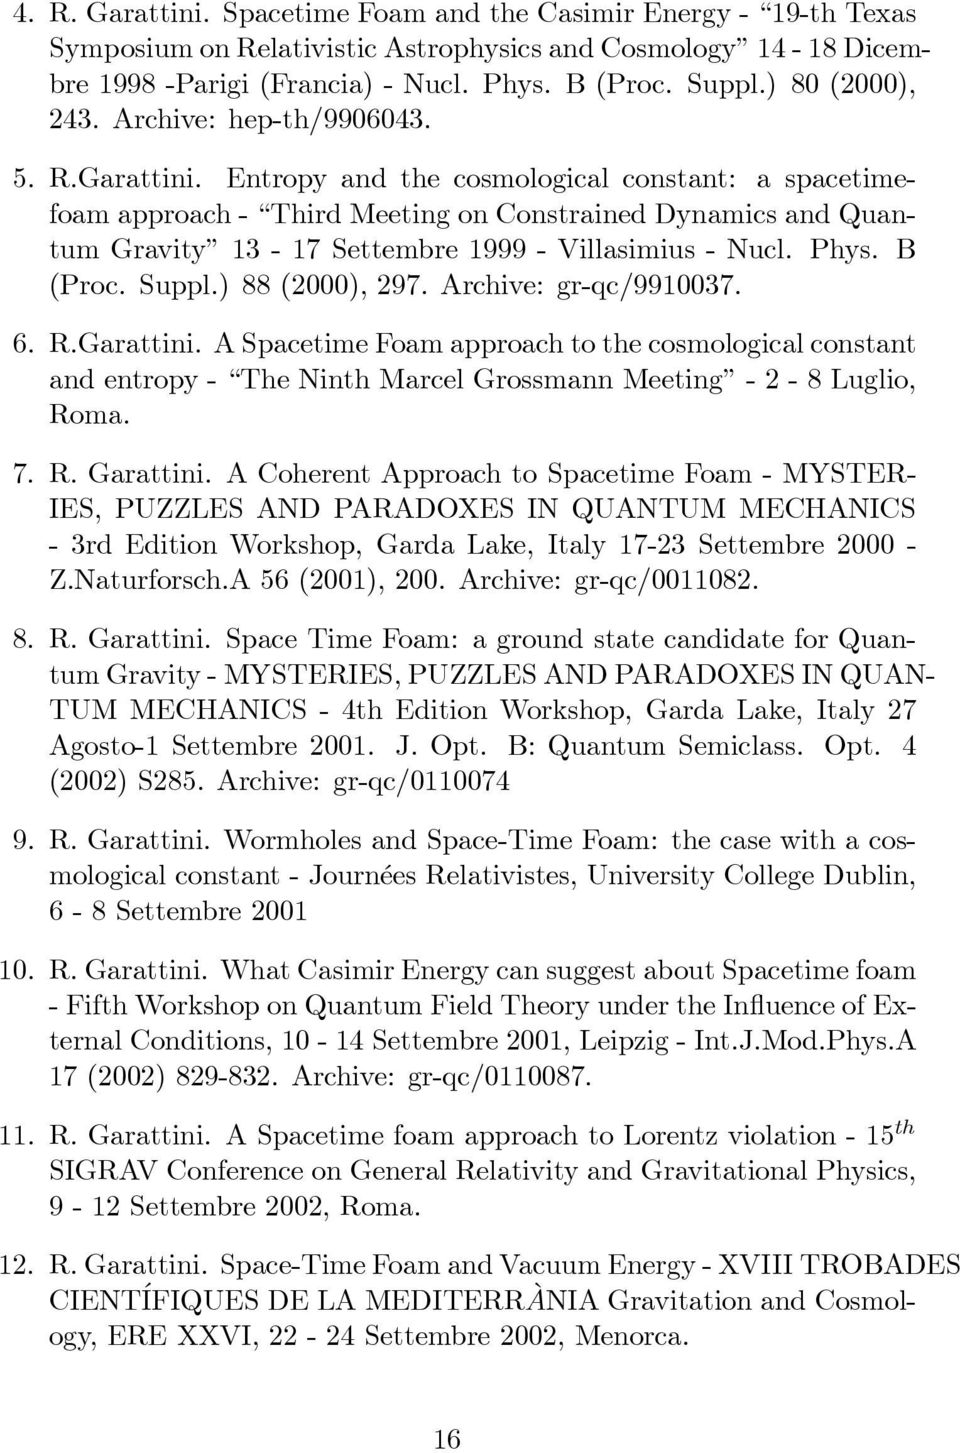 Entropy and the cosmological constant: a spacetimefoam approach - Third Meeting on Constrained Dynamics and Quantum Gravity 13-17 Settembre 1999 - Villasimius - Nucl. Phys. B (Proc. Suppl.